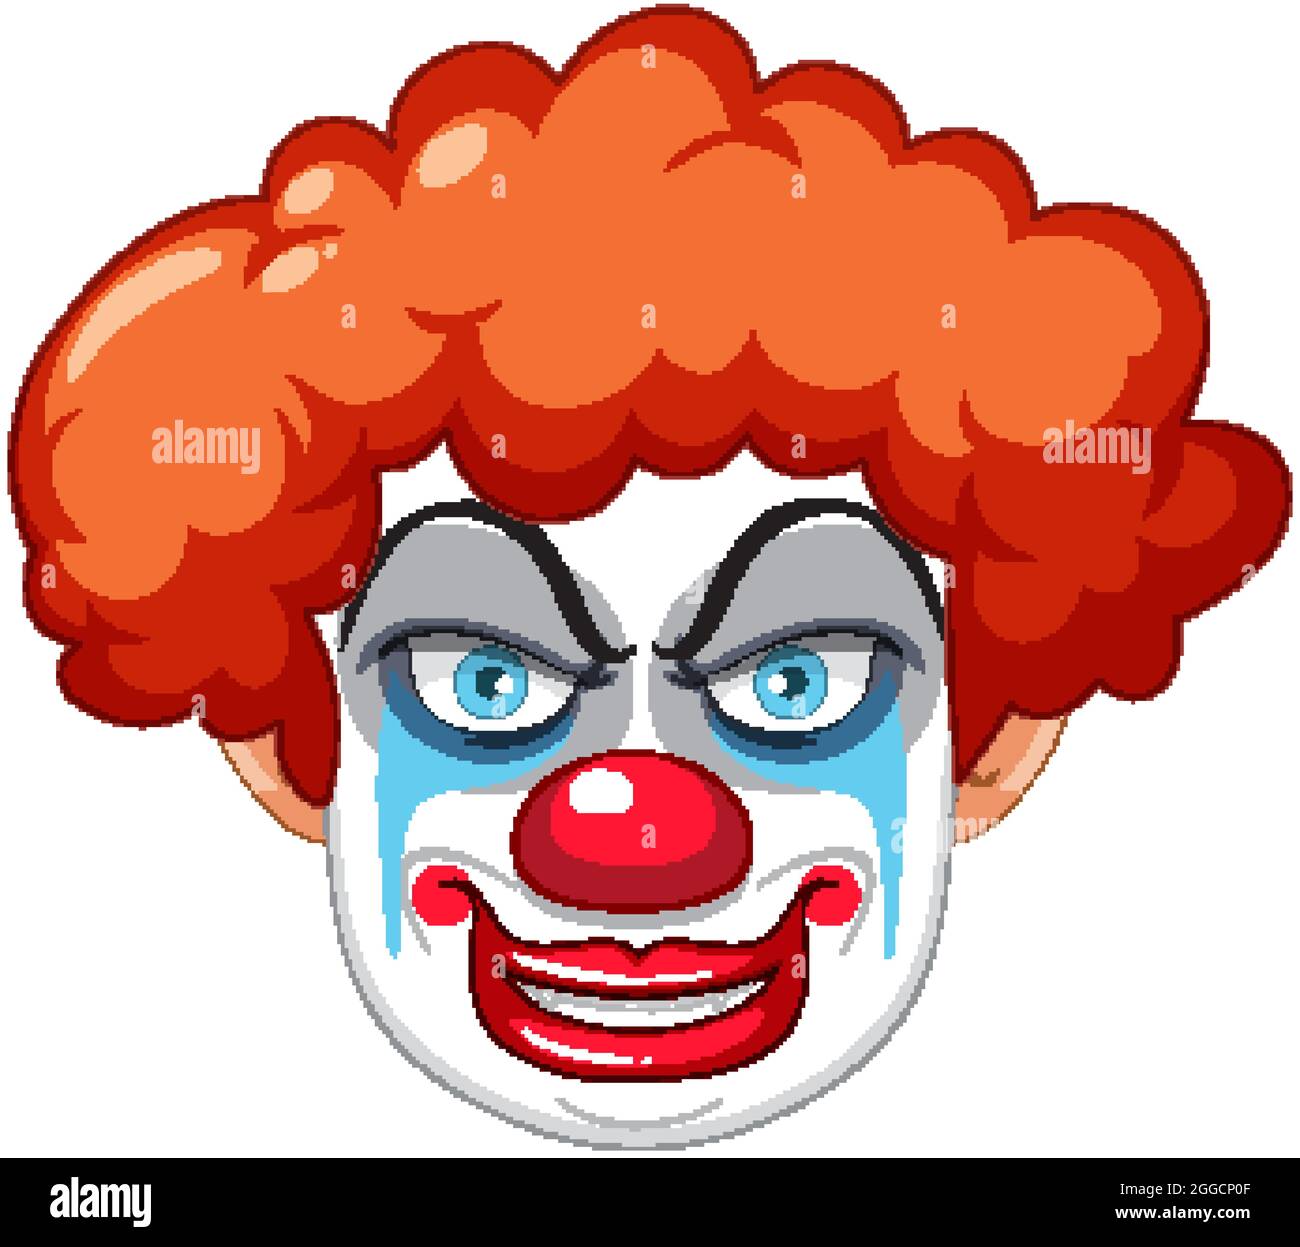 Creepy clown face on white background illustration Stock Vector Image ...